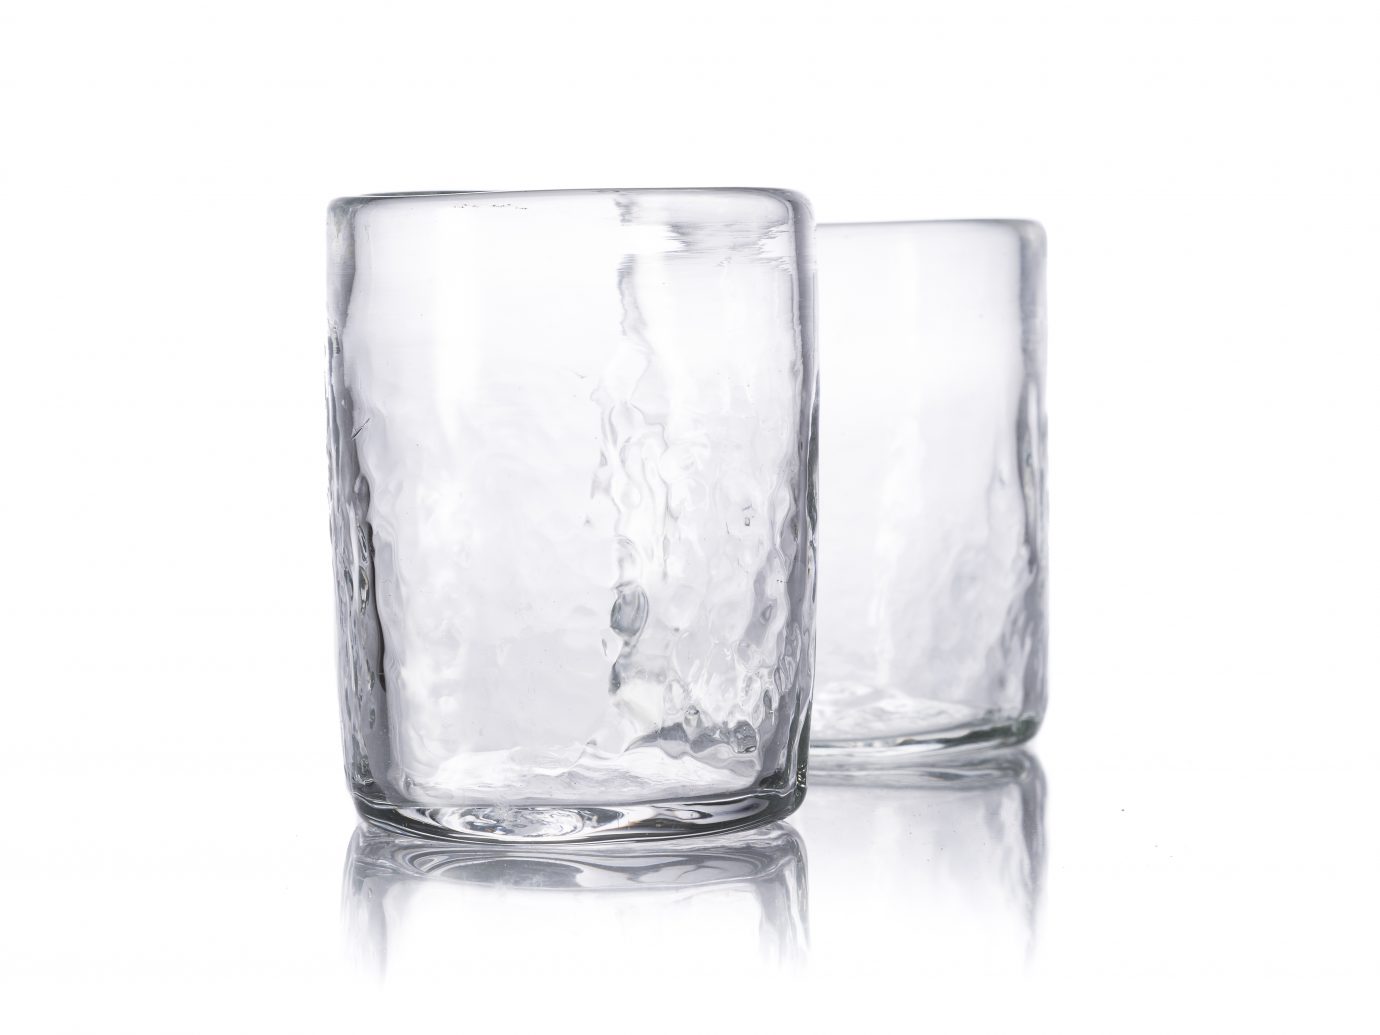 Studio Xaquixe Glasses, handmade drinking glasses from oaxaca with bubbles in them